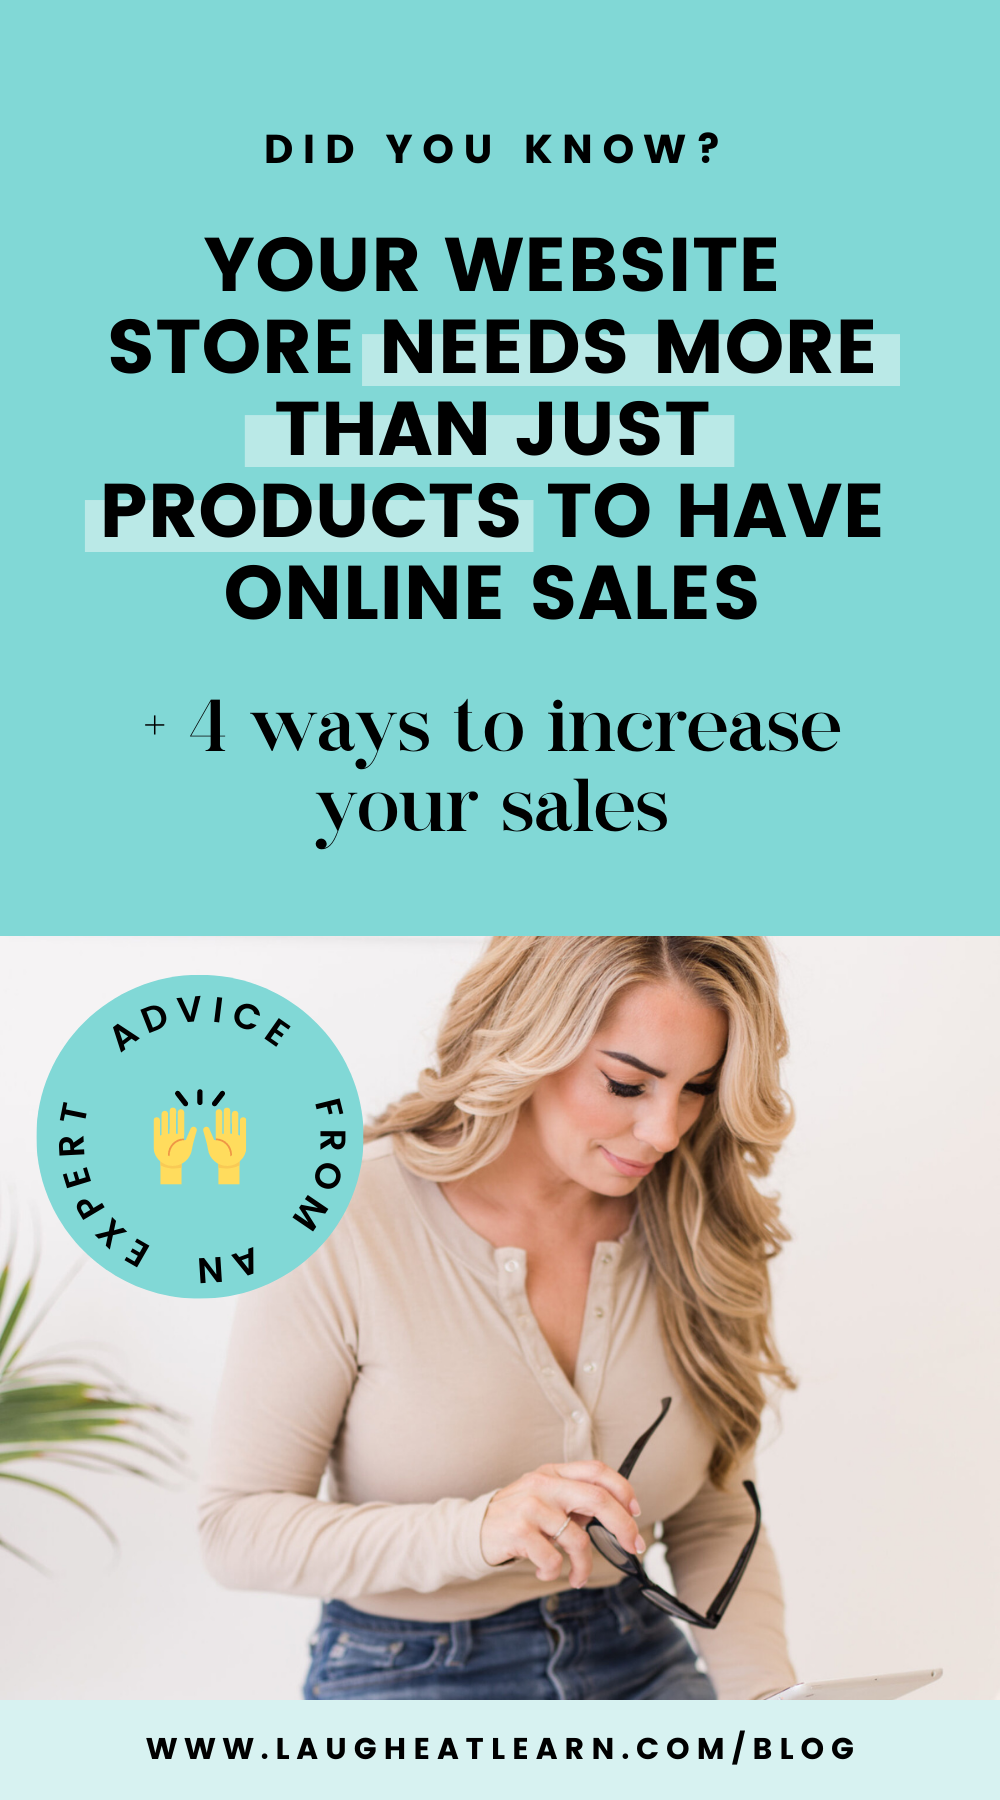 Want to know how to increase online sales? I'm giving you four quick tips for boosting sales on your website.